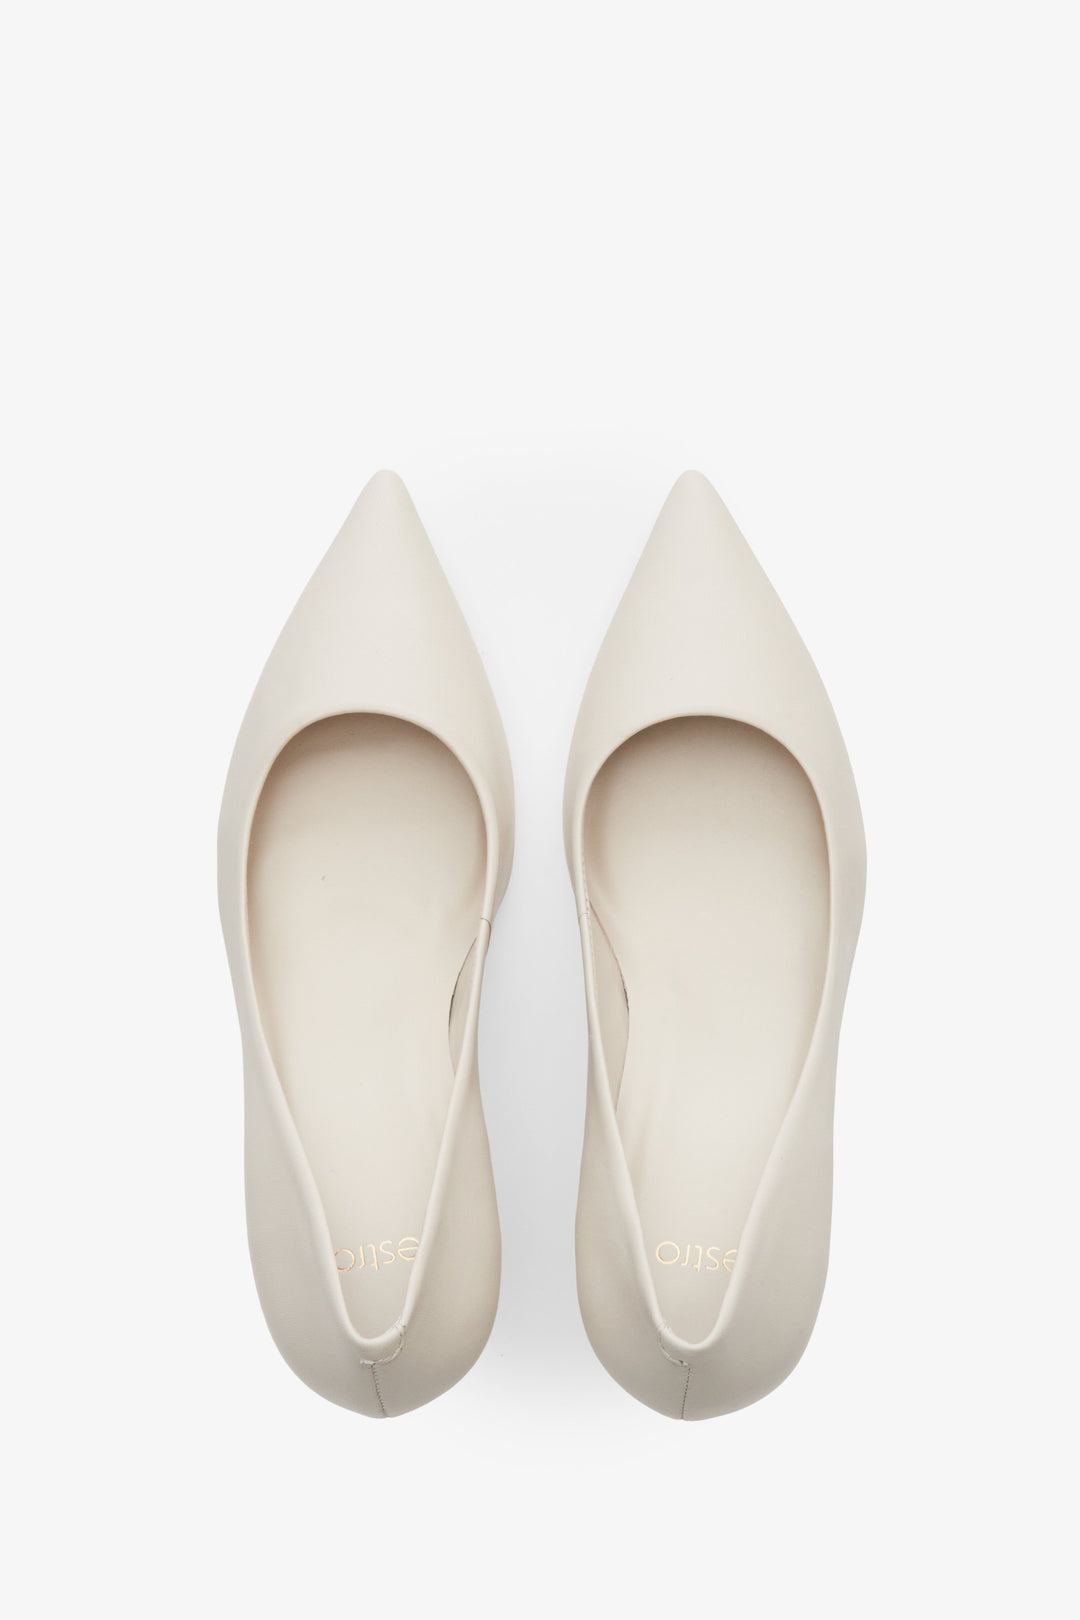 Women's light beige leather pumps by Estro with a low stiletto heel and pointed toe - top view presentation of the model.